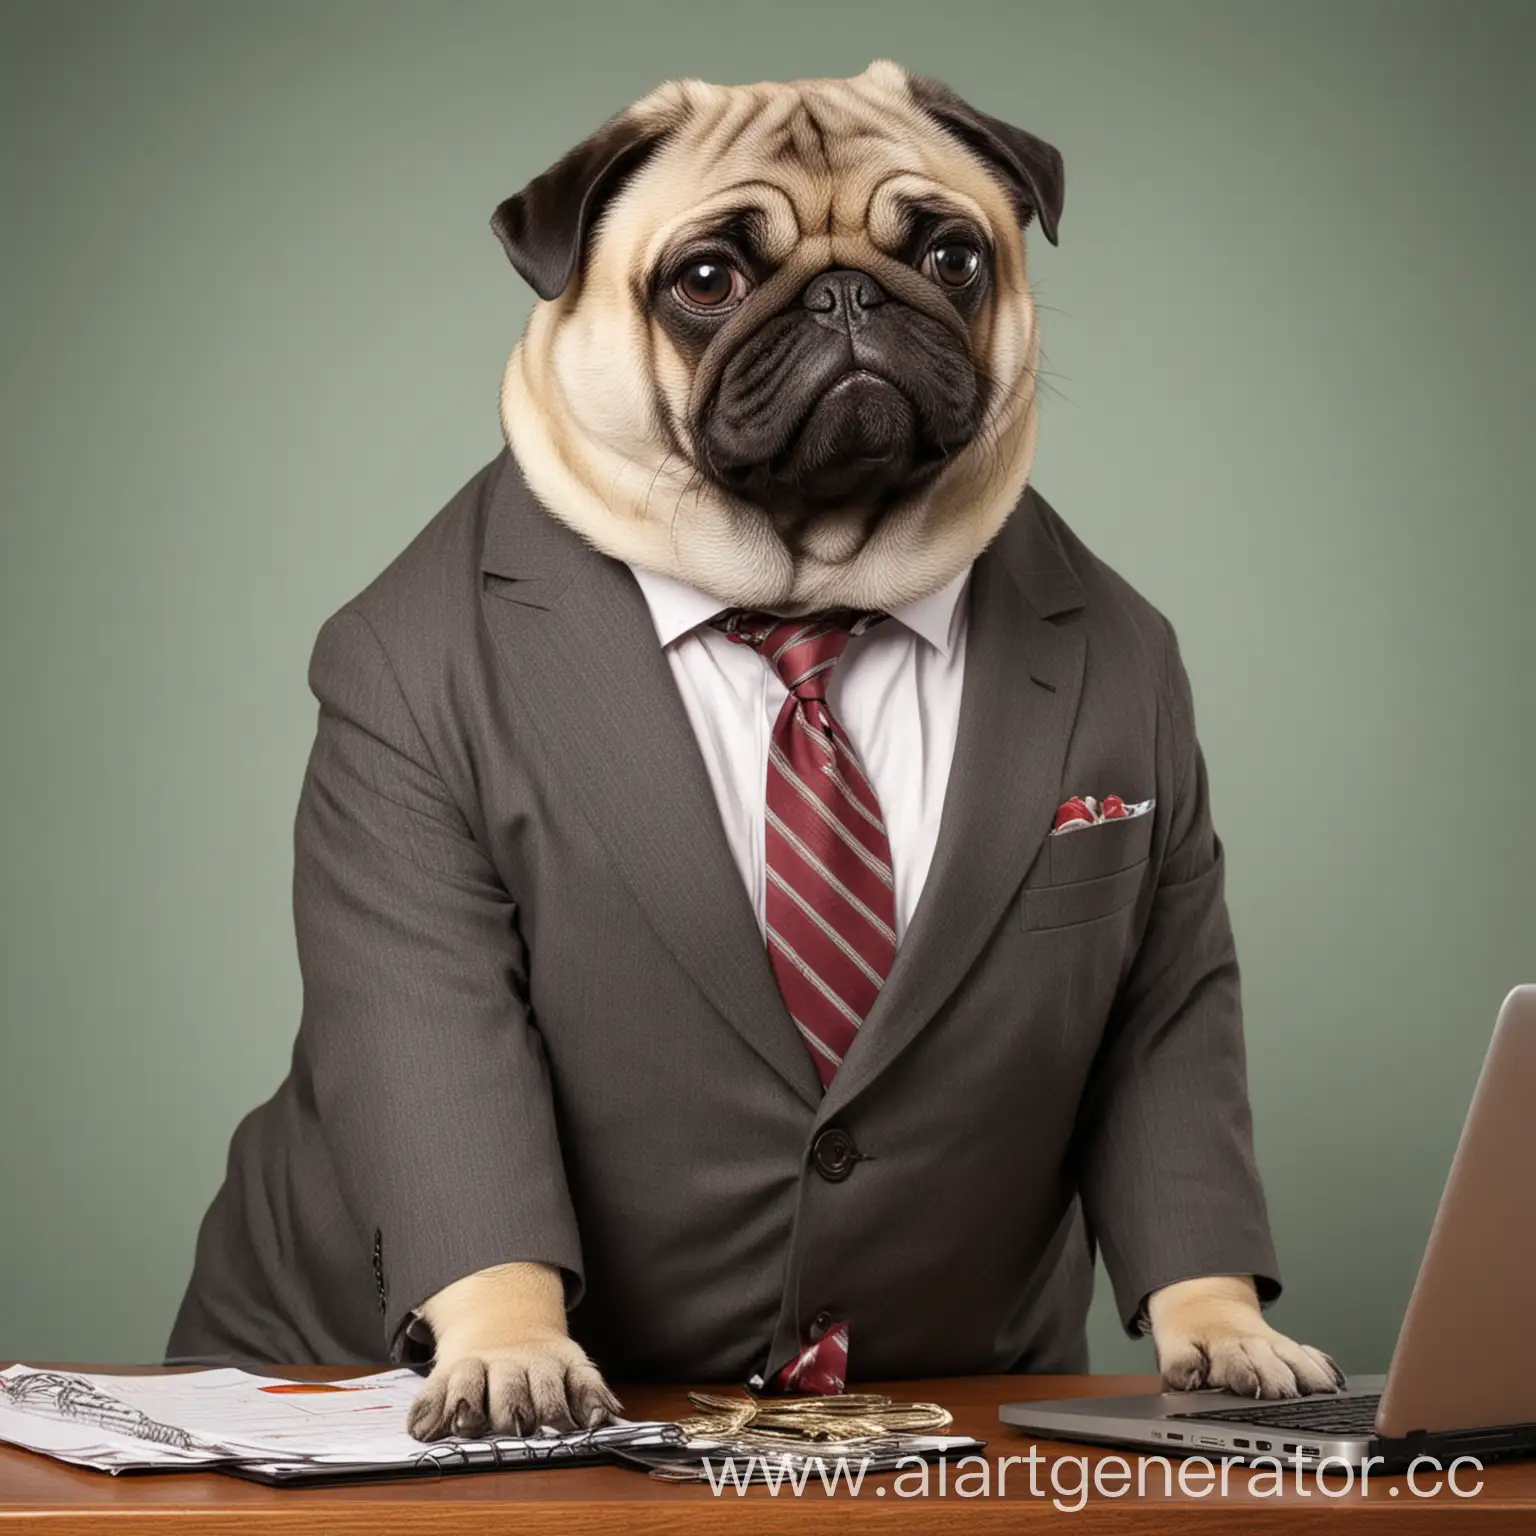 Chubby-Pug-Businessman-Wearing-Suit-and-Tie